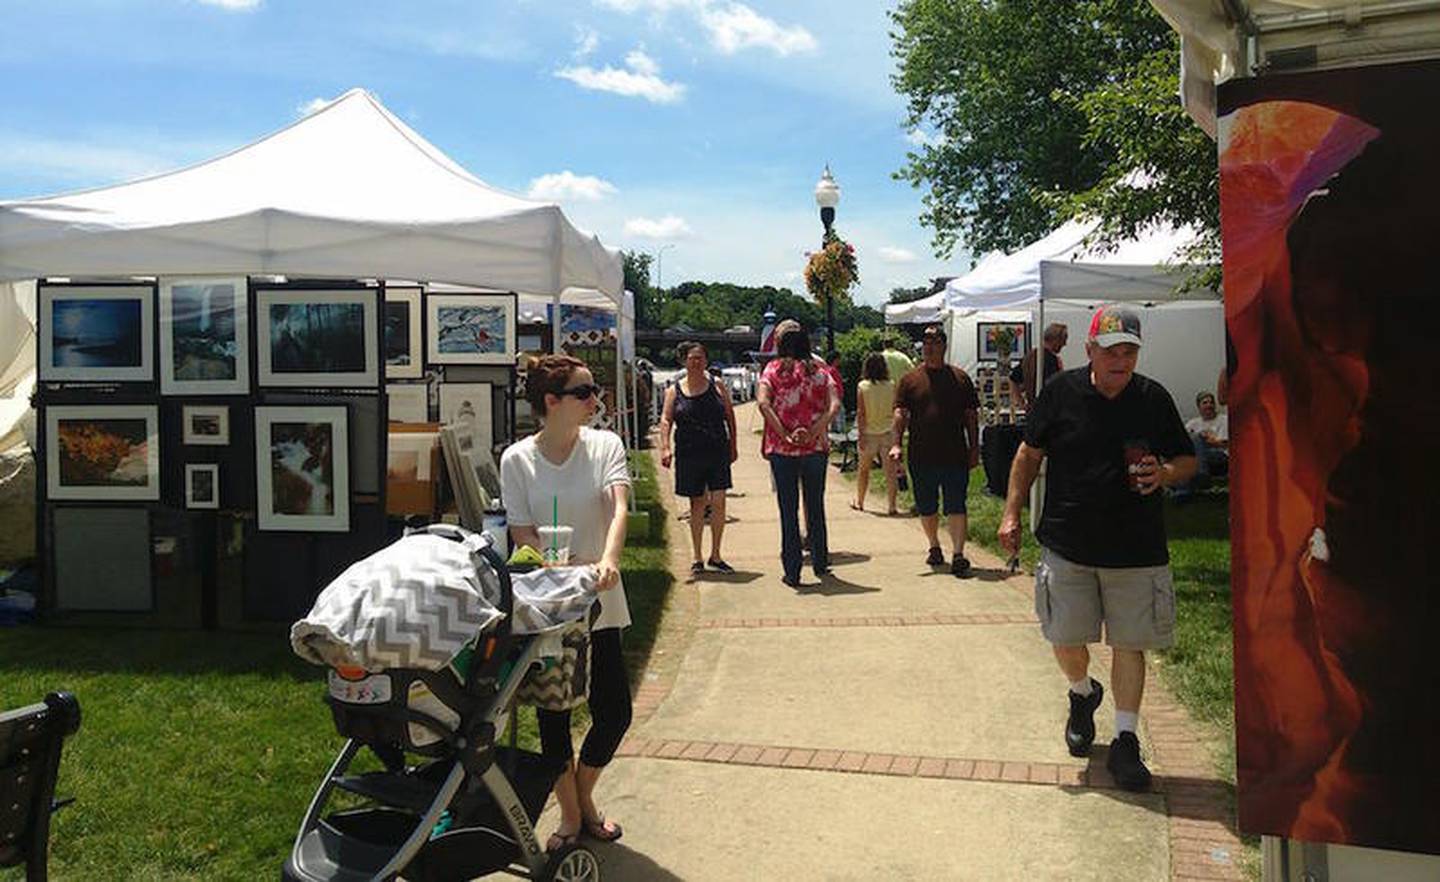 ART ON THE FOX

Downtown Riverfront Park, Algonquin (one block north of Algonquin Road)
June 17-18

Celebrating its 10th anniversary, this art show features a variety of art for sale in a variety of media. The show runs from 10 a.m. to 5 p.m. both days. Visit ArtontheFox.com for more information.